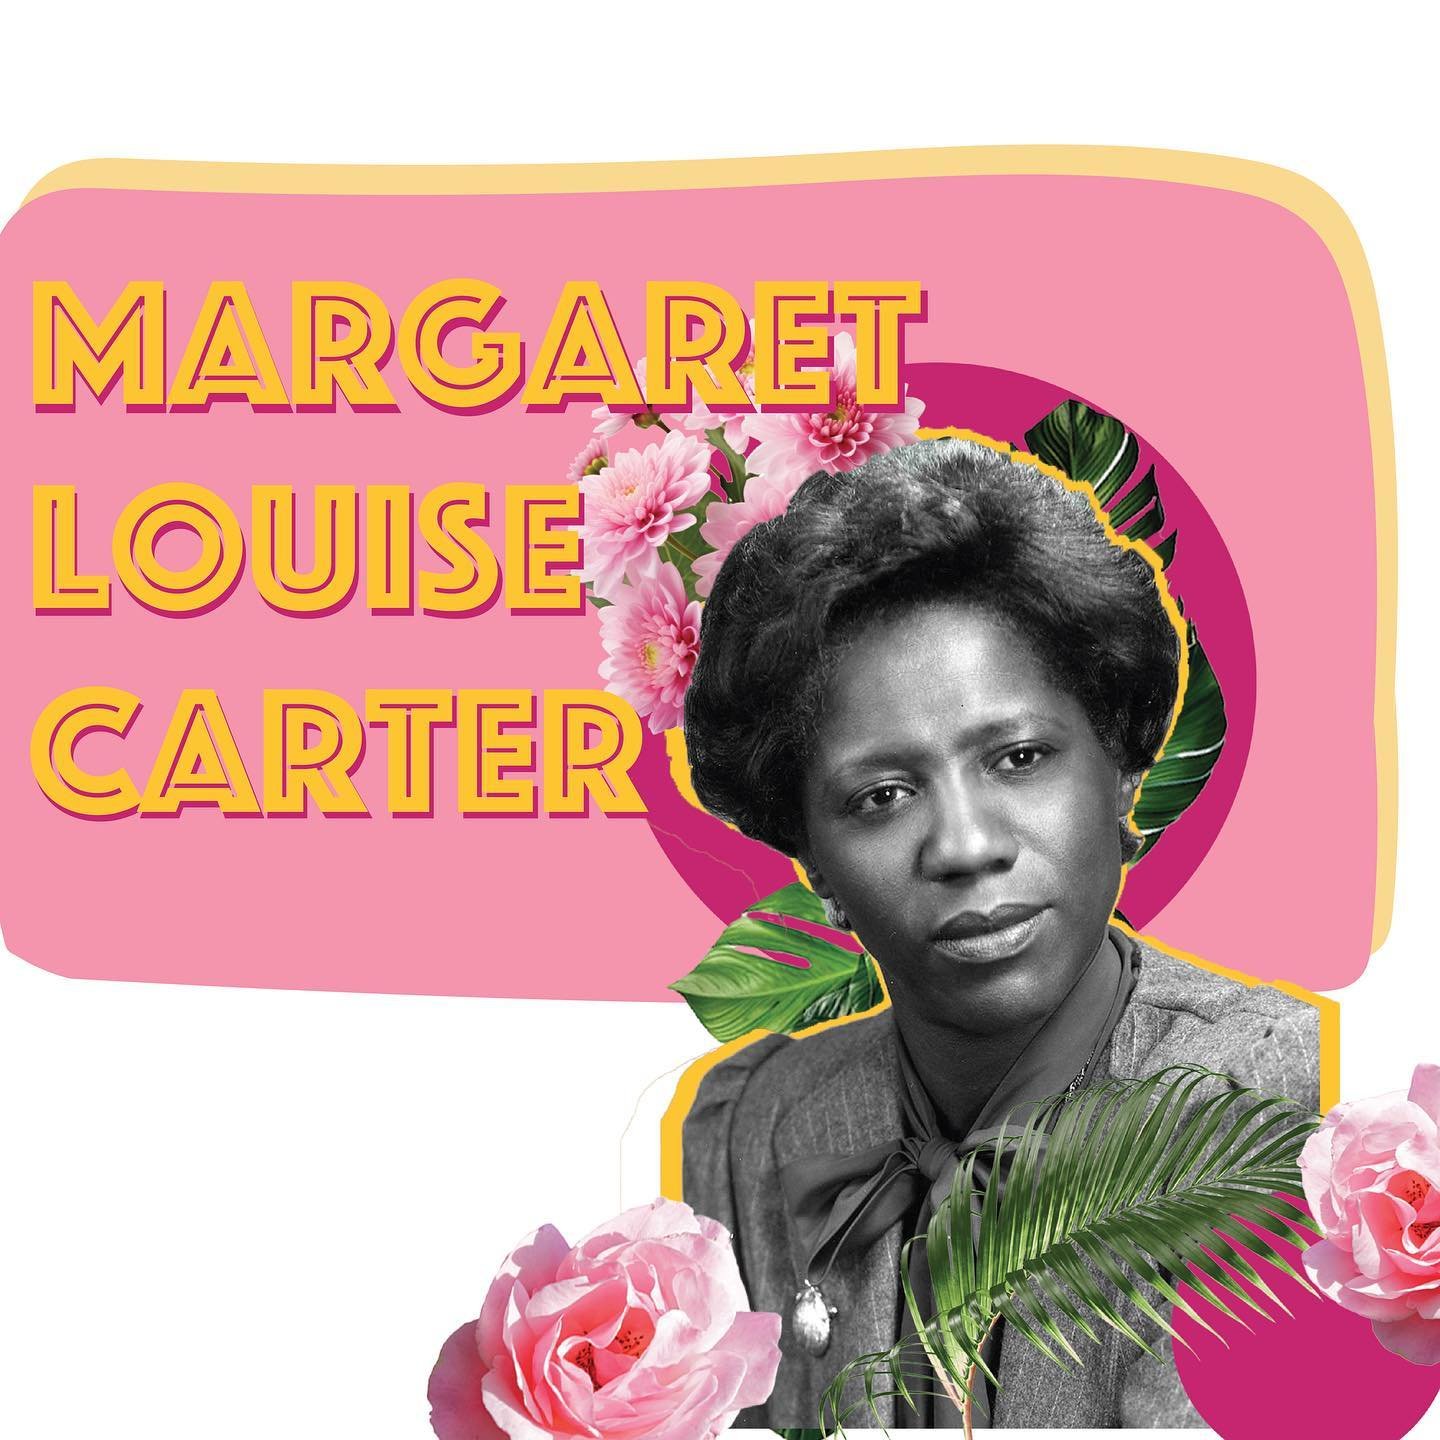 Meet Margaret Louise Carter! The final and most contemporary history making Black woman for this series. 💐💖💫✊🏾

Did you learn something new along the way? We sure did! Thanks for following and stay tuned for updates about all our various projects